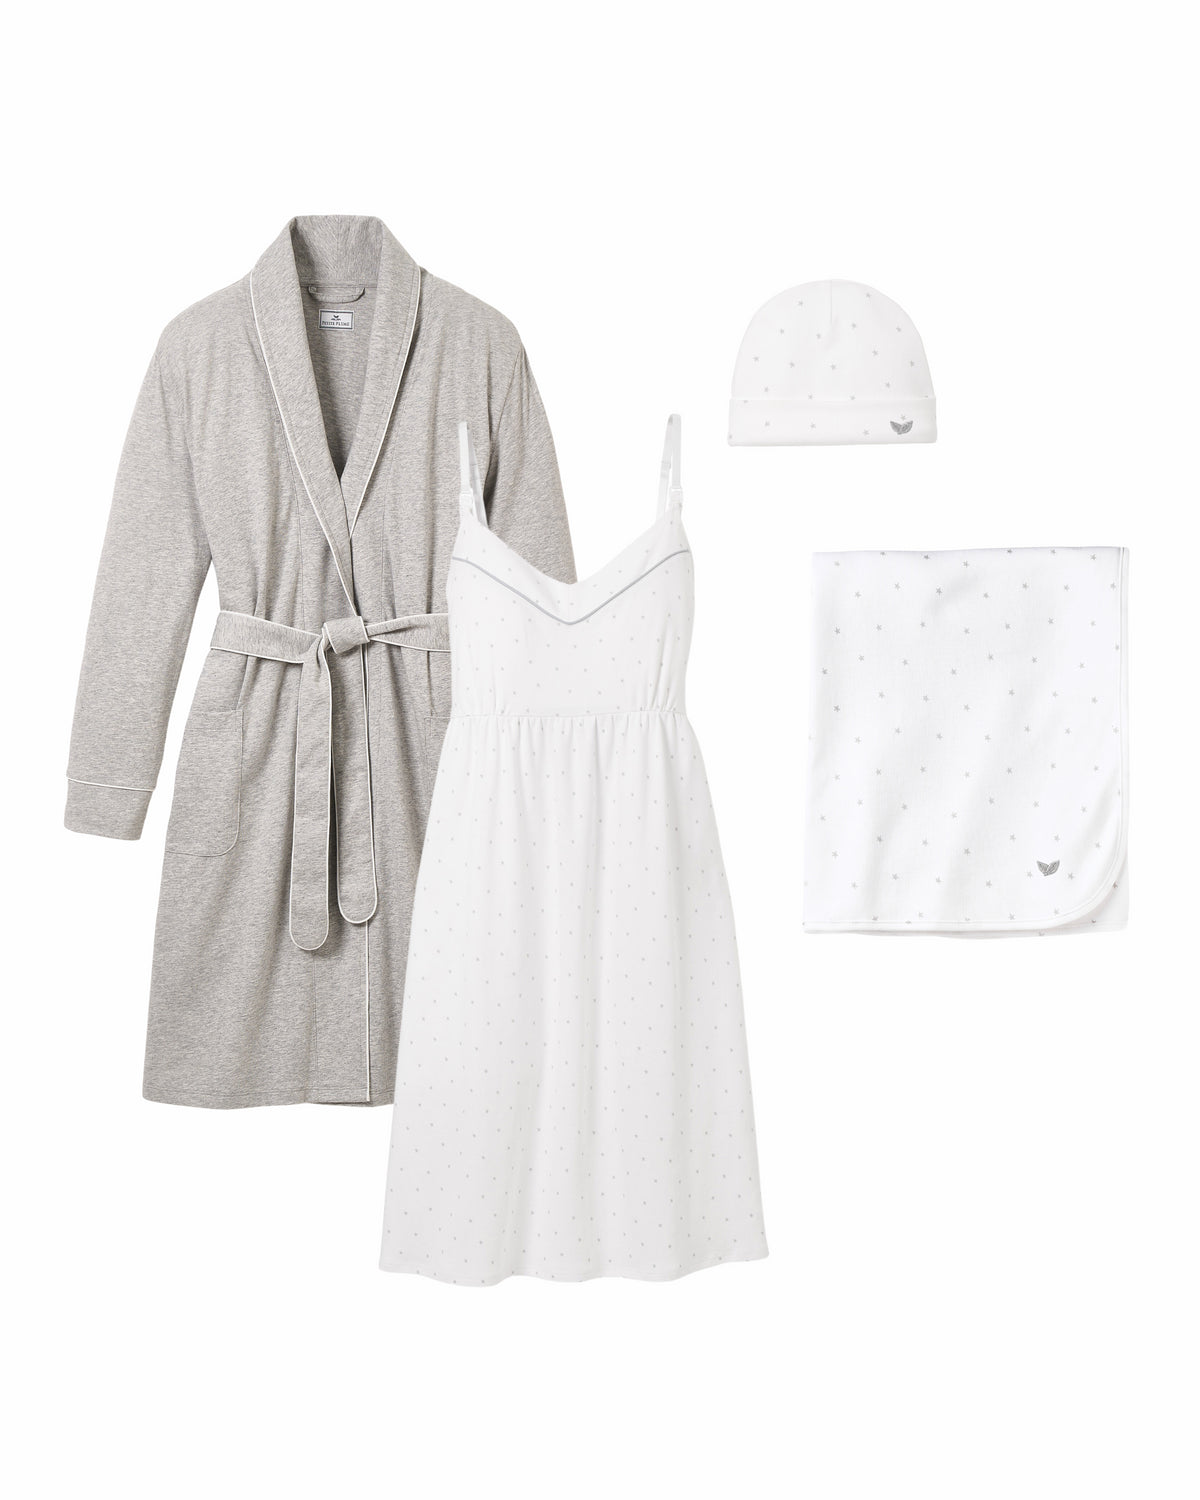 The Hospital Stay Luxe Set in Light Heather Grey & Grey Stars